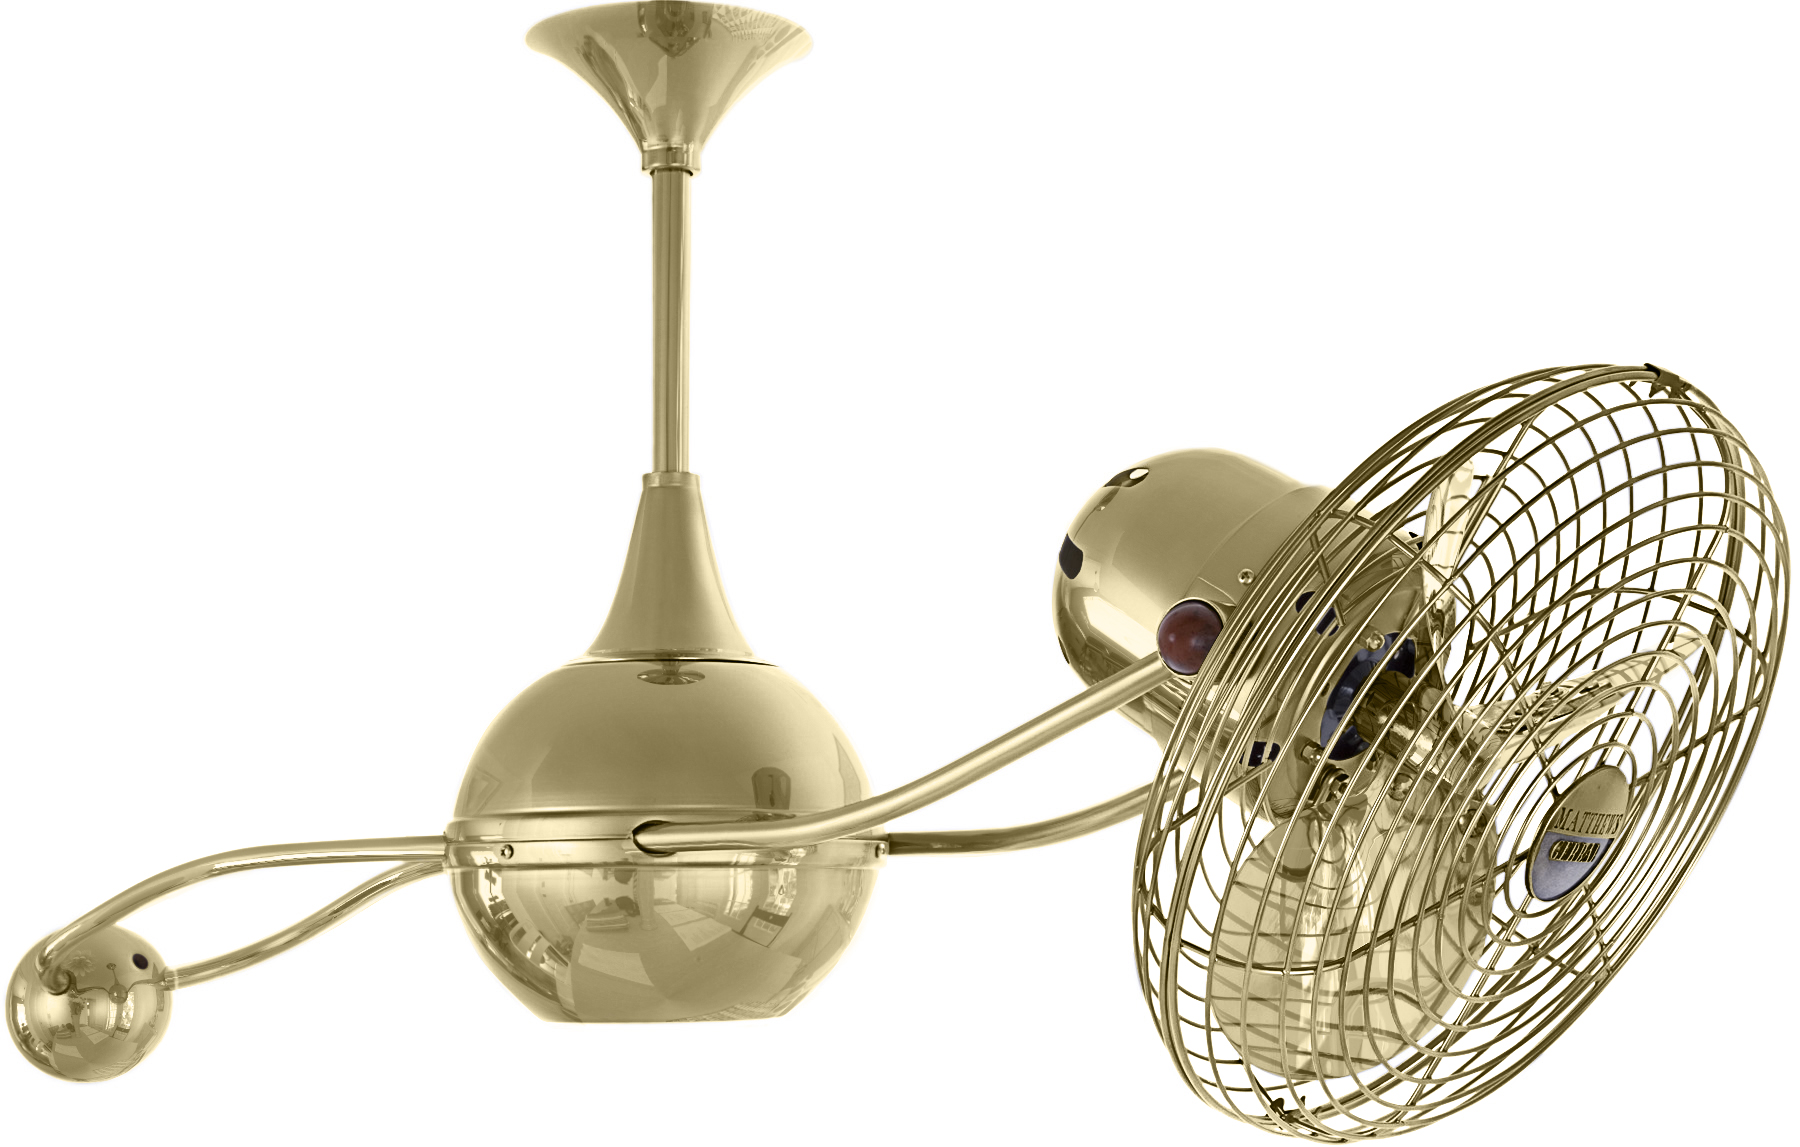 Brisa 2000 ceiling fan in Polished Brass finish with Metal Blades in safety cage made by Matthews Fan Company.